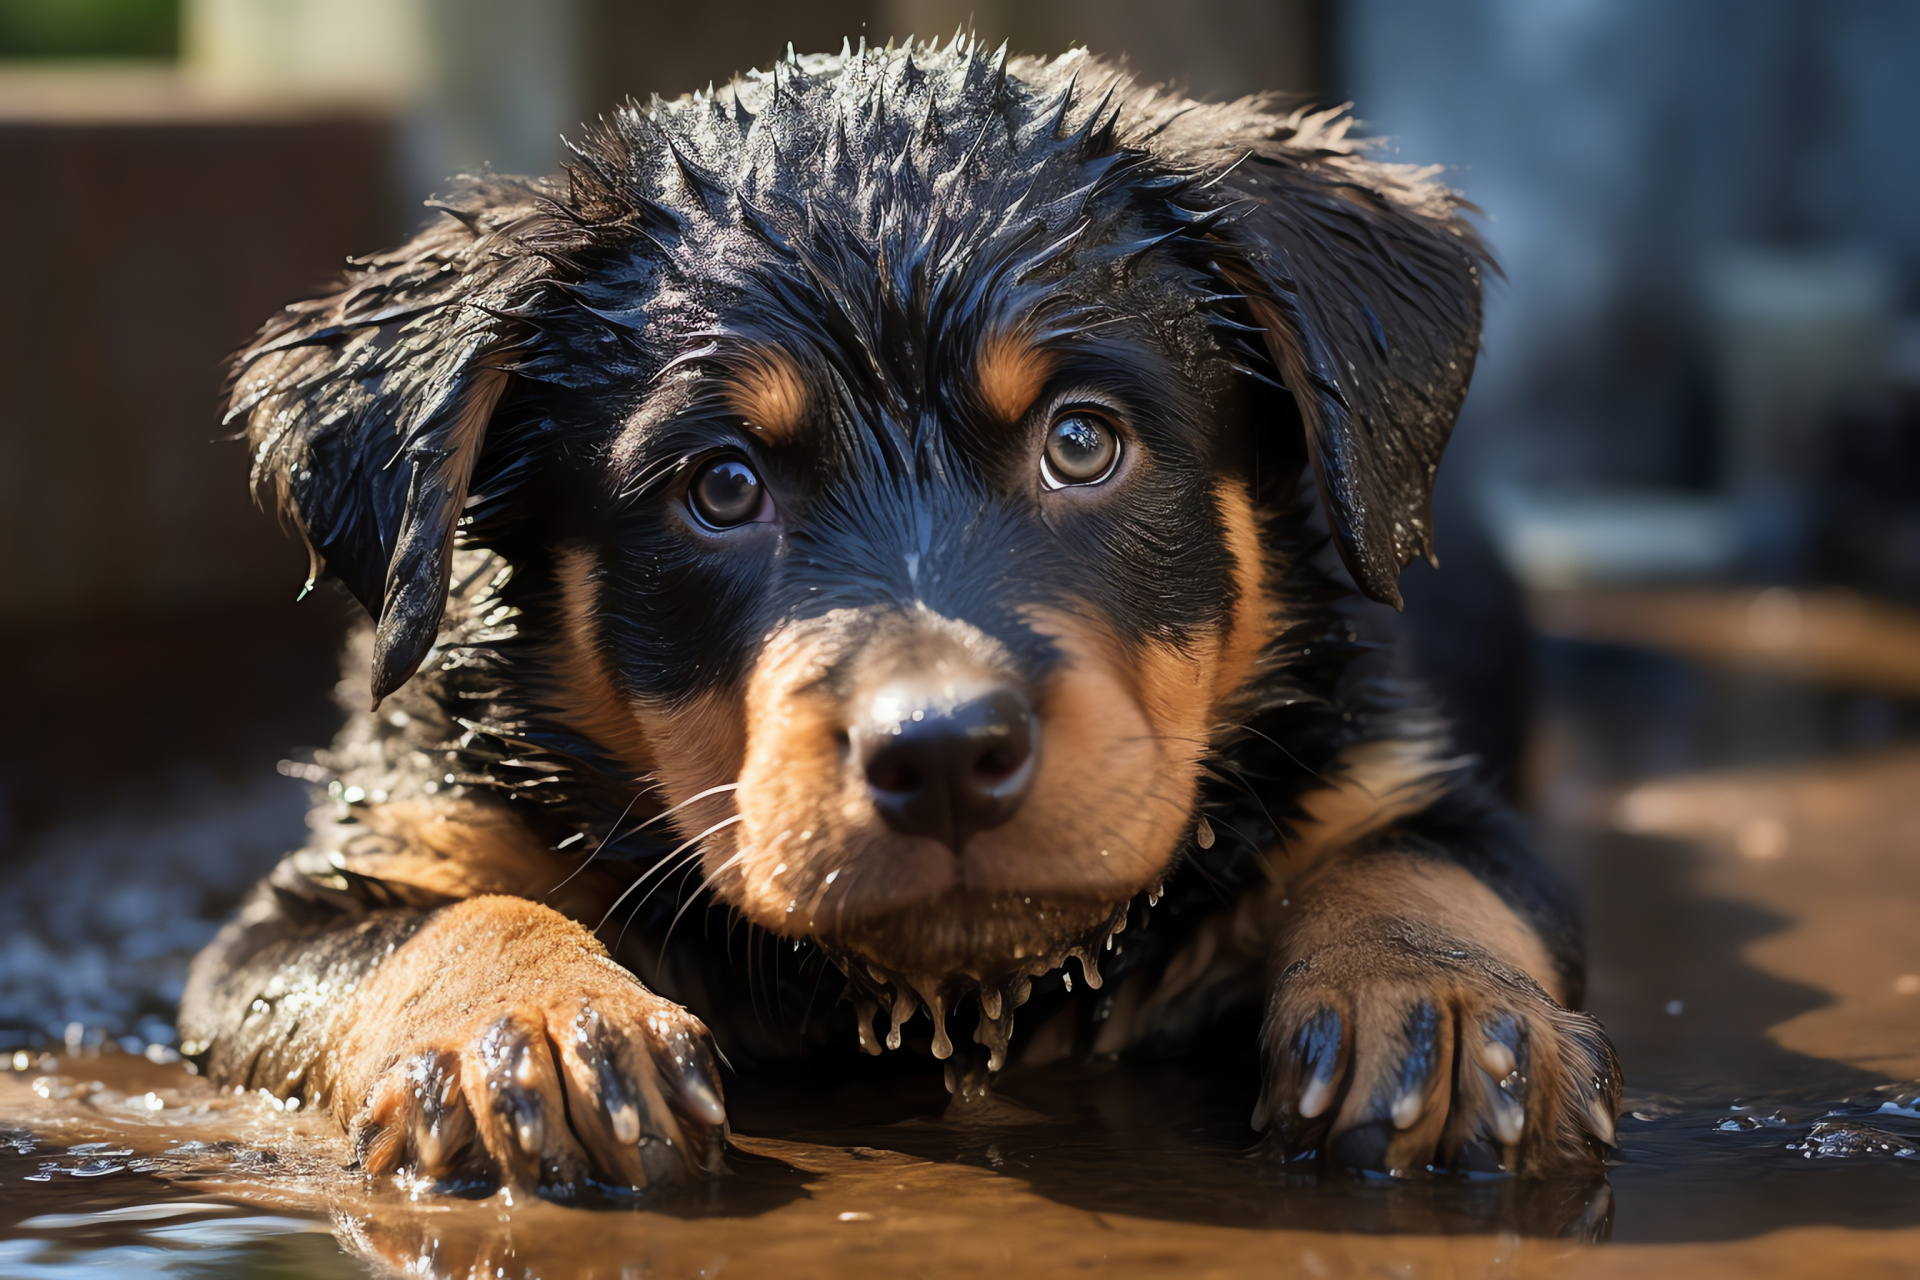 Rottweiler pup, Canine youth, Puppy dog eyes, Soft fur texture, Pet care, HD Desktop Image